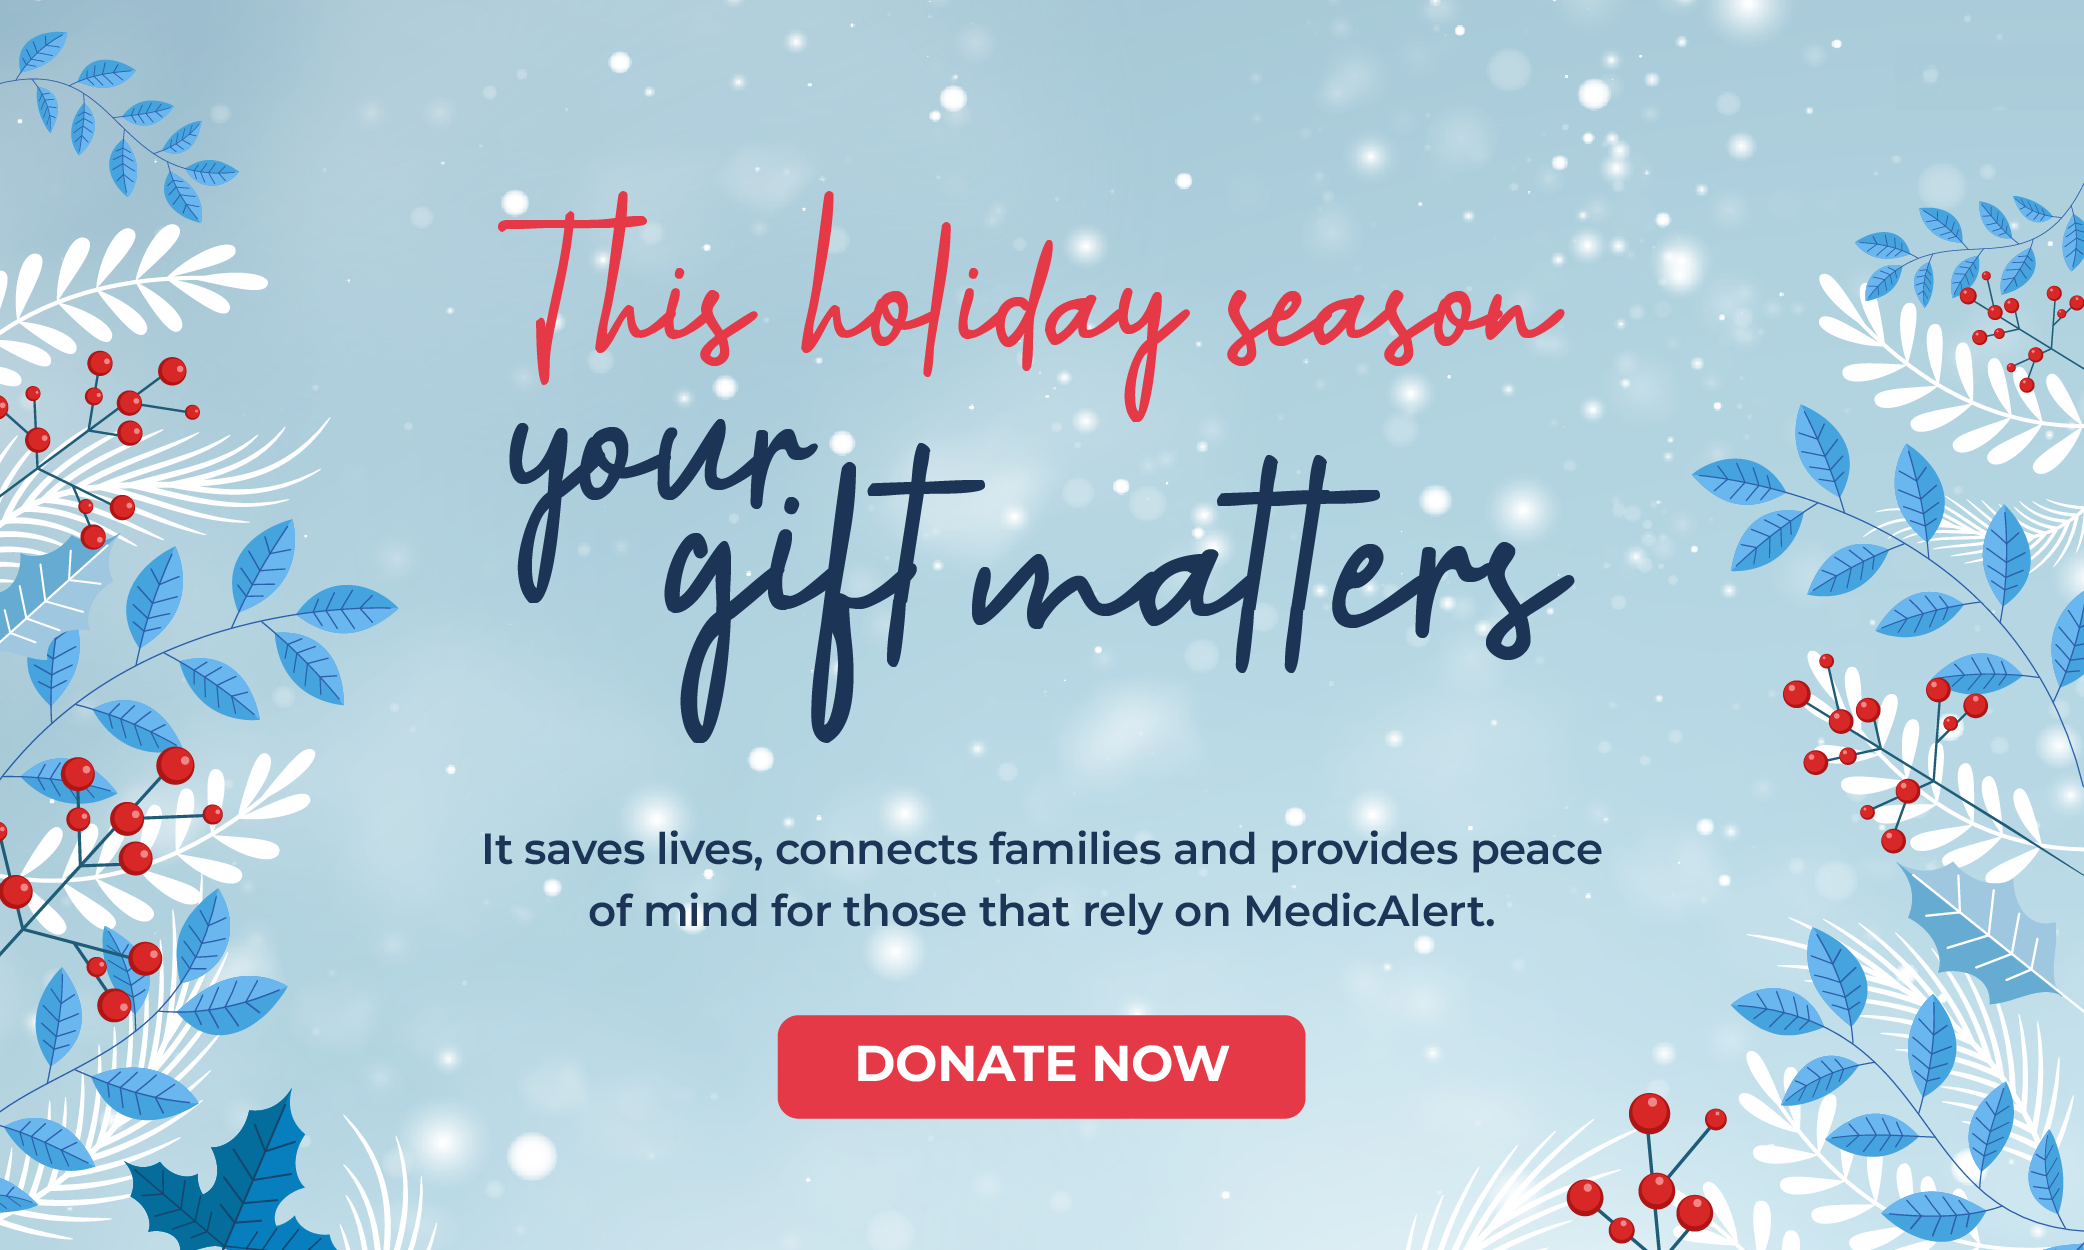 This Holiday Season your gift matters. It saves lives, connects families and provides peace of mind for those that rely on MedicAlert. Donate Now